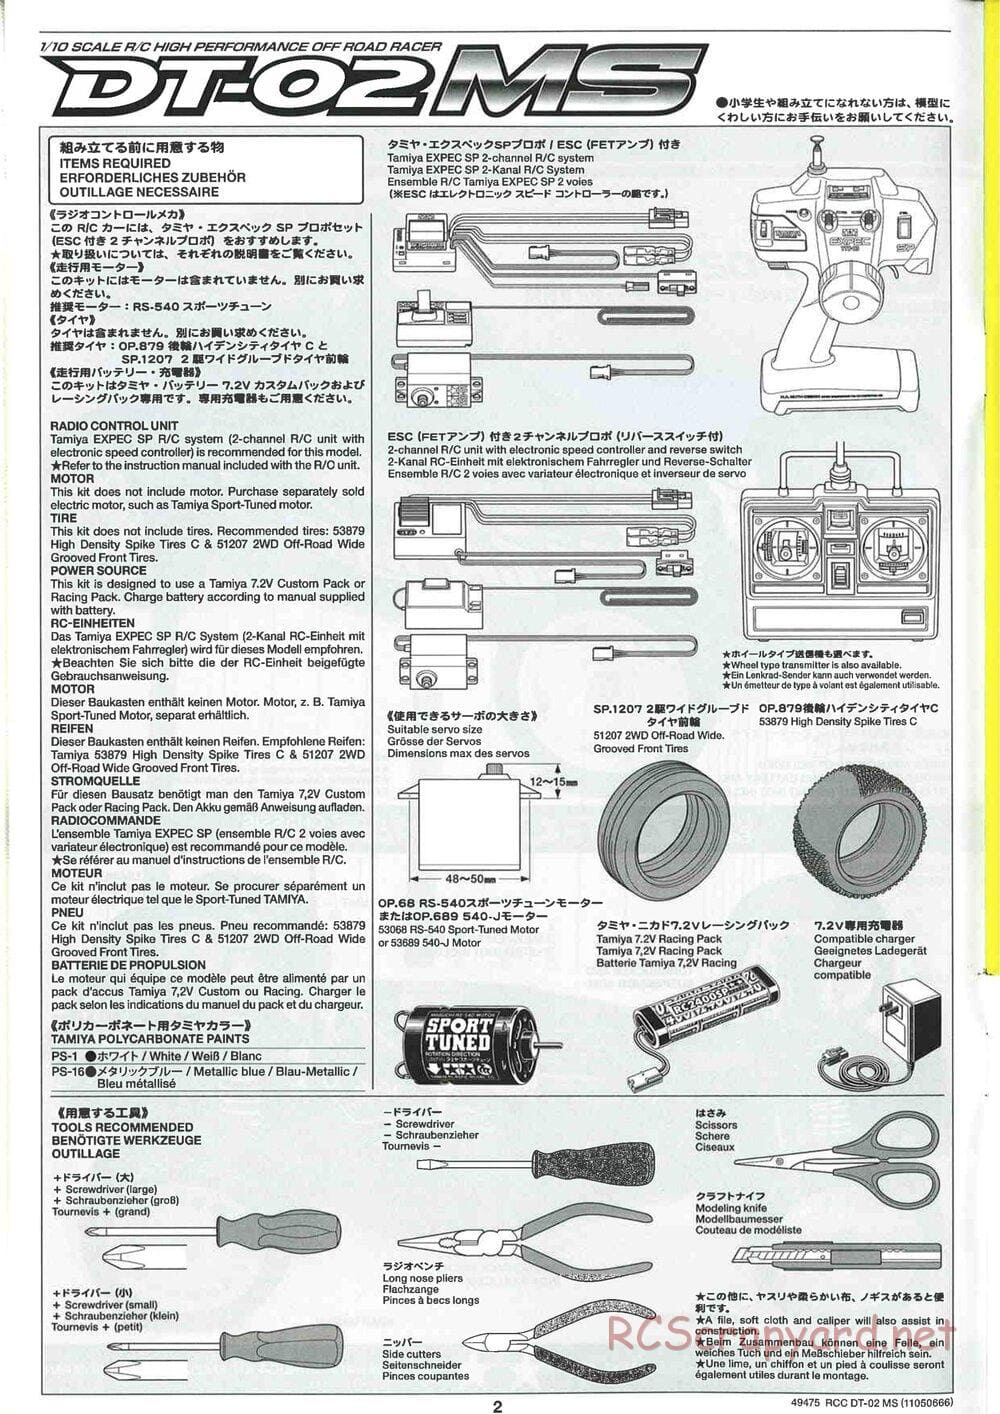 Tamiya - DT-02 MS Chassis - Manual - Page 3